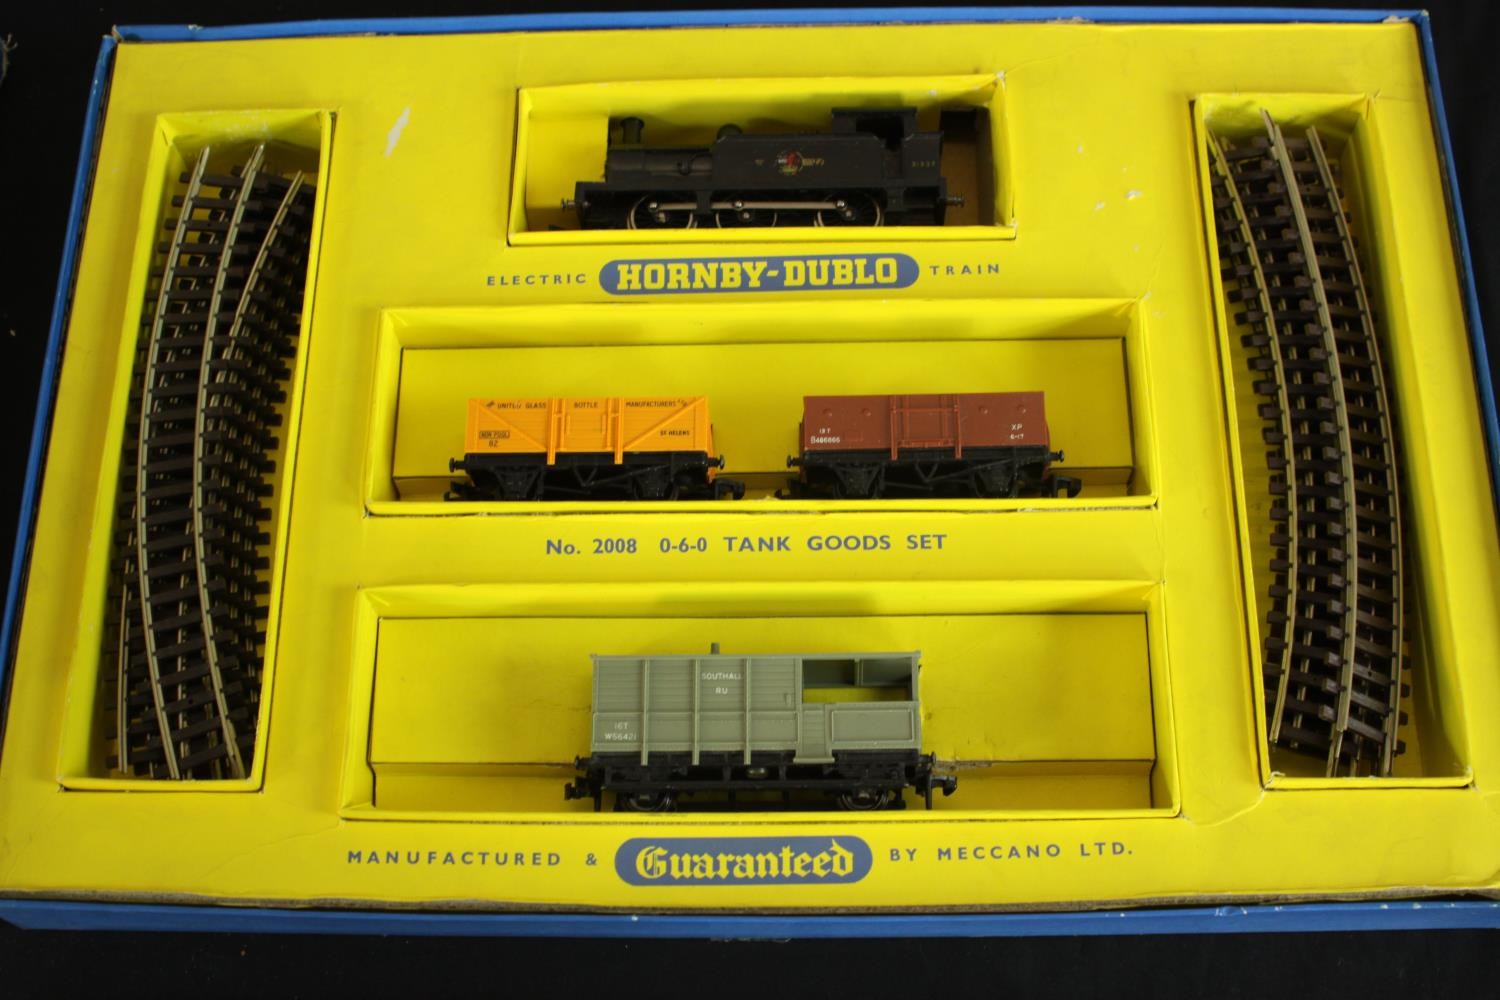 A boxed Hornby Dublo 2-rail electric train set, Set 2008 0-6-0 Tank Goods Train. Made in the UK by - Image 5 of 12